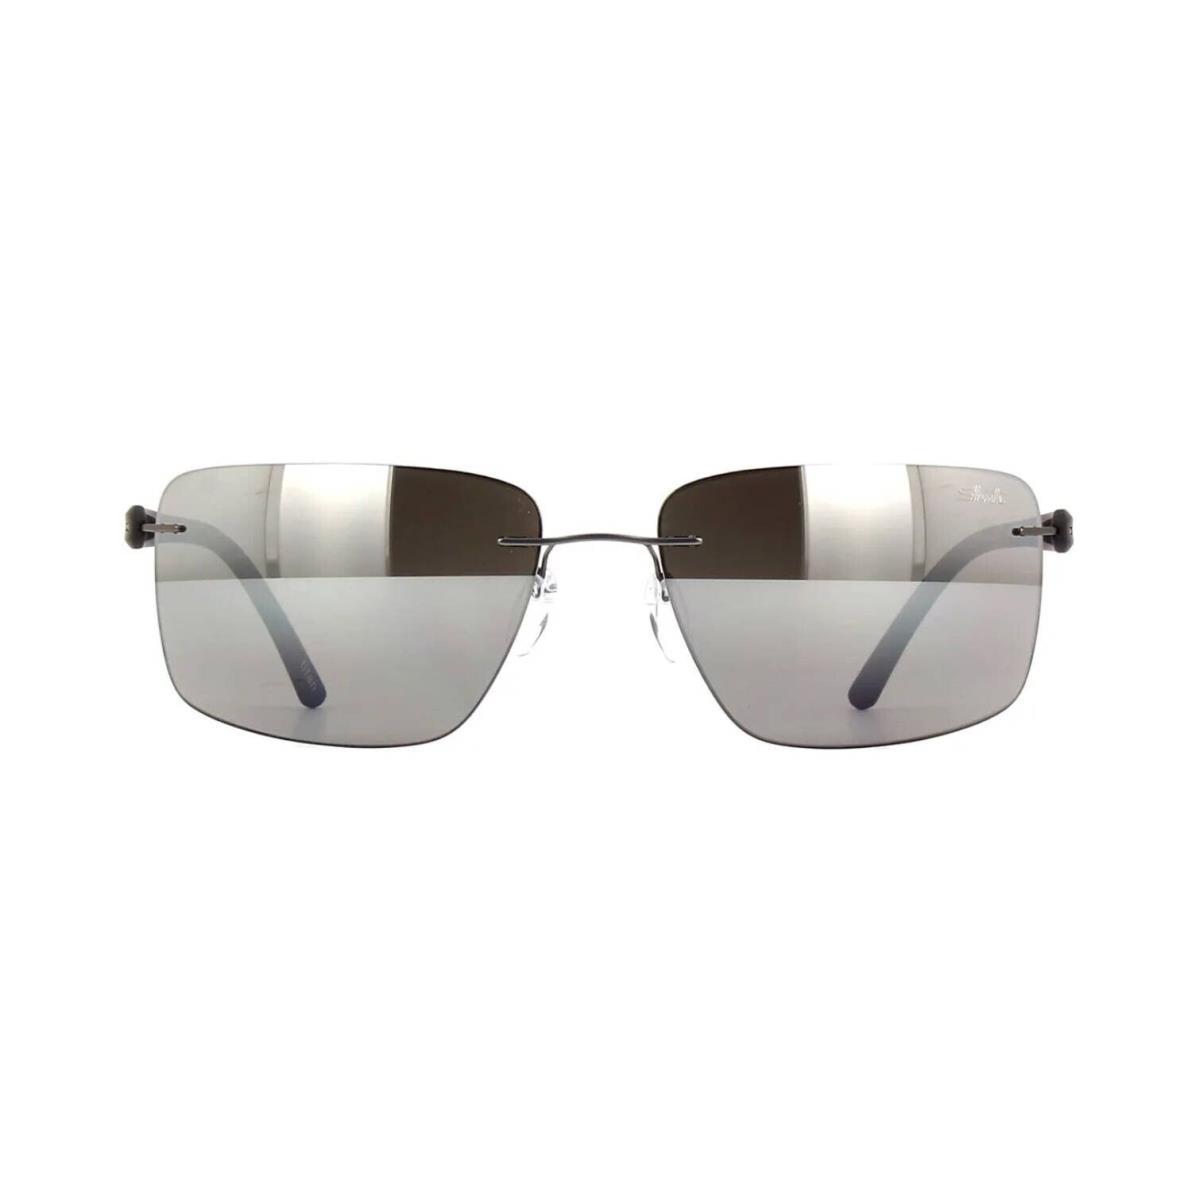 Silhouette Carbon T1 8722 Ruthenium/grey Shaded Mirrored 6560 Sunglasses